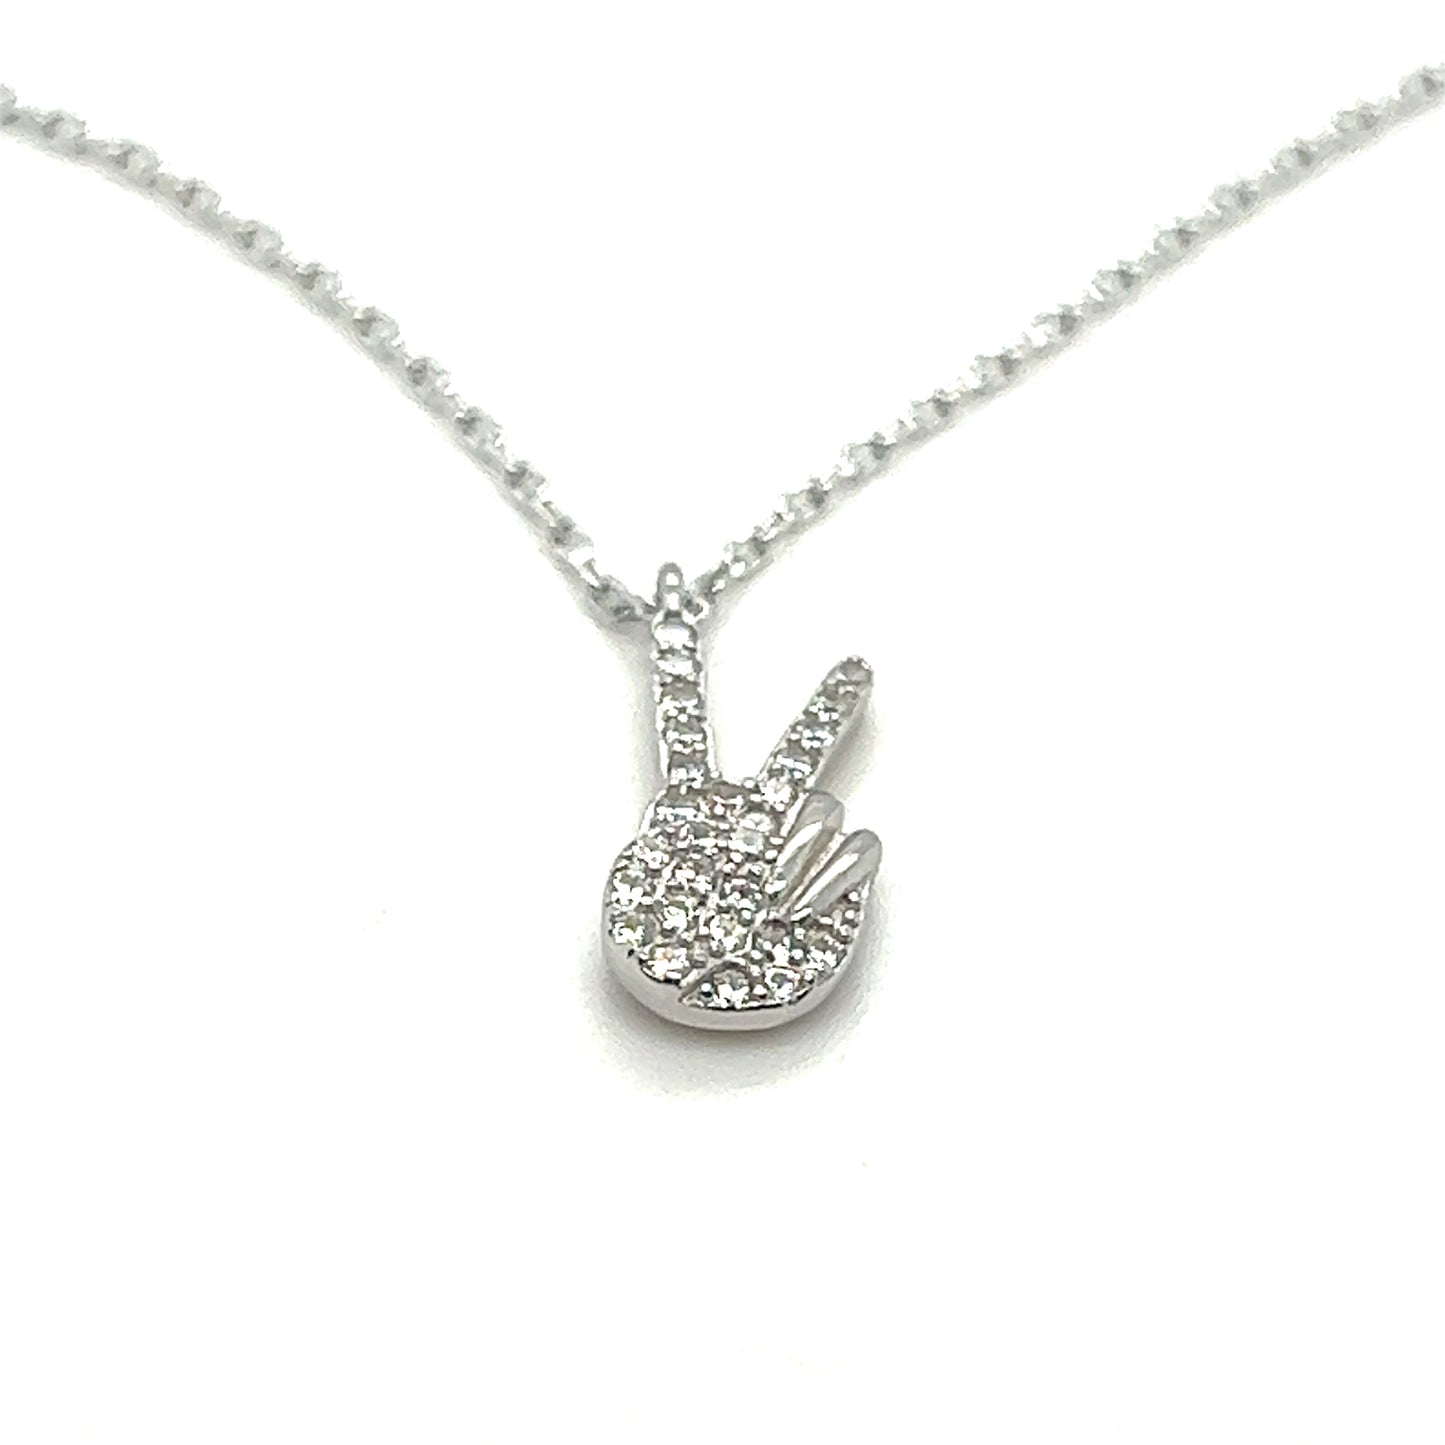 A Glitzy Peace Sign Necklace with a diamond hand on it from Super Silver.